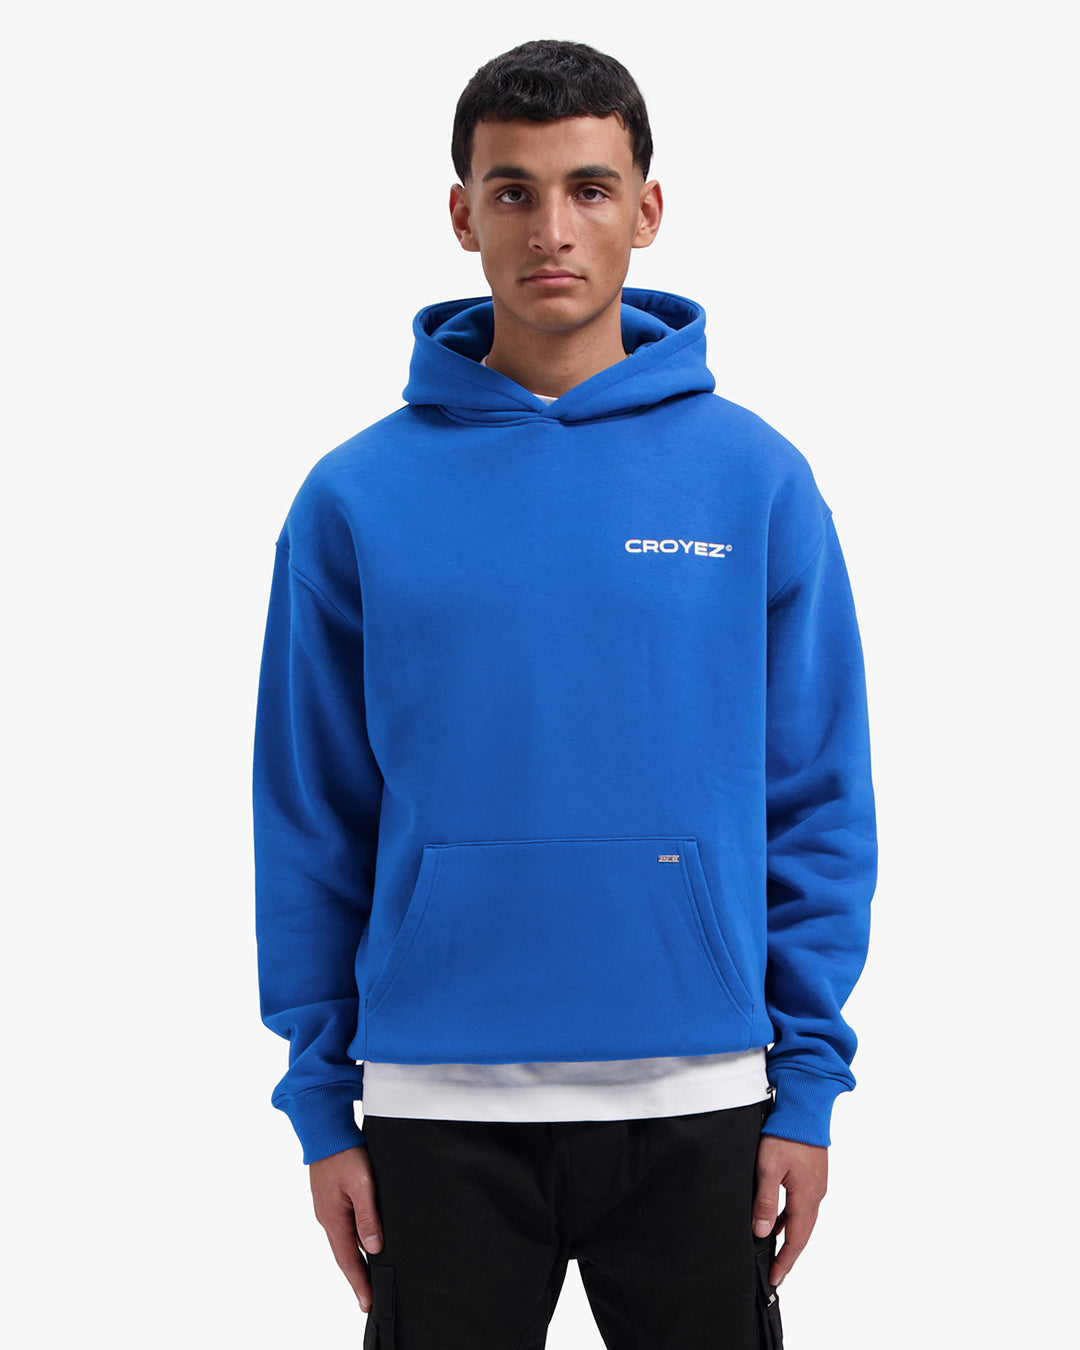 Croyez Family Owned Business Hoodie